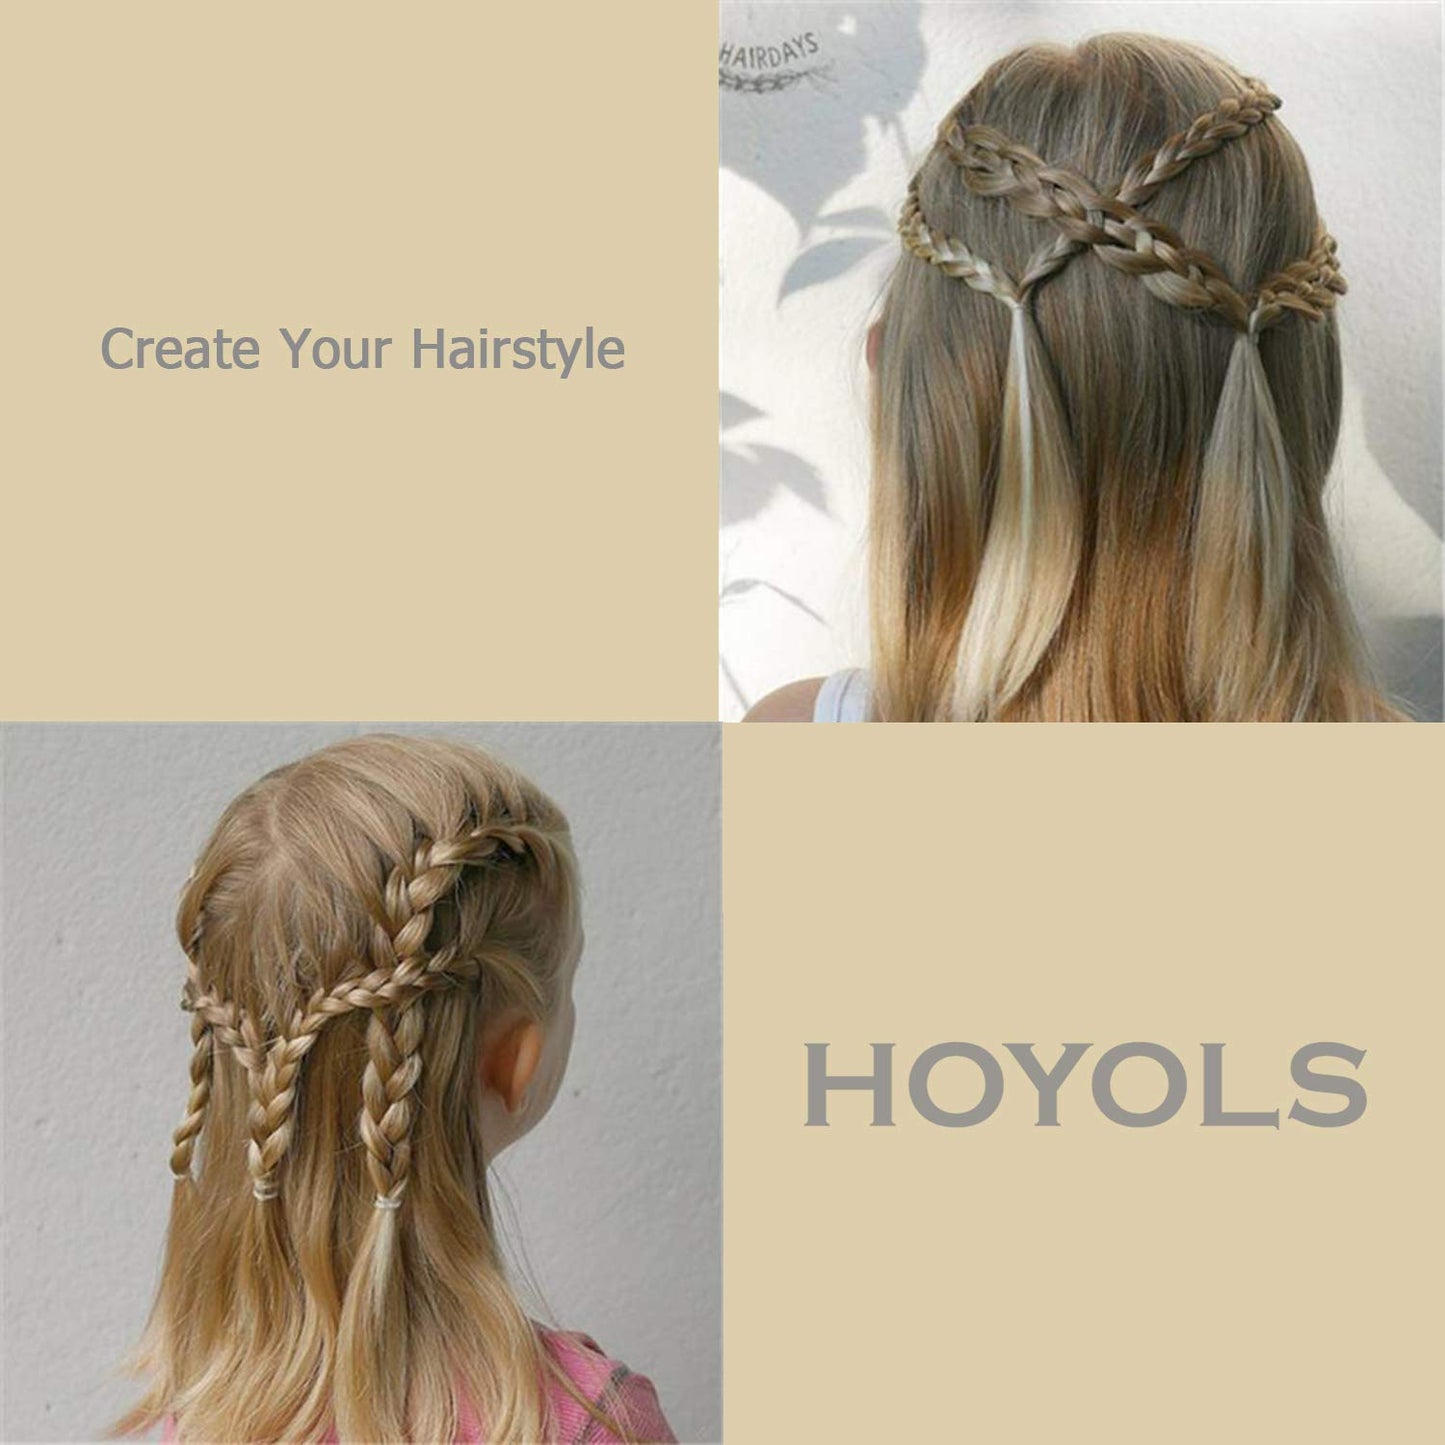 HOYOLS Clear Elastic Hair Rubber Bands, 1500pcs Mini Small Clear Ponytail Elastics Holders for Blond Kids Girls Hair No Crease Damage No Hurt 1 Inch TPU